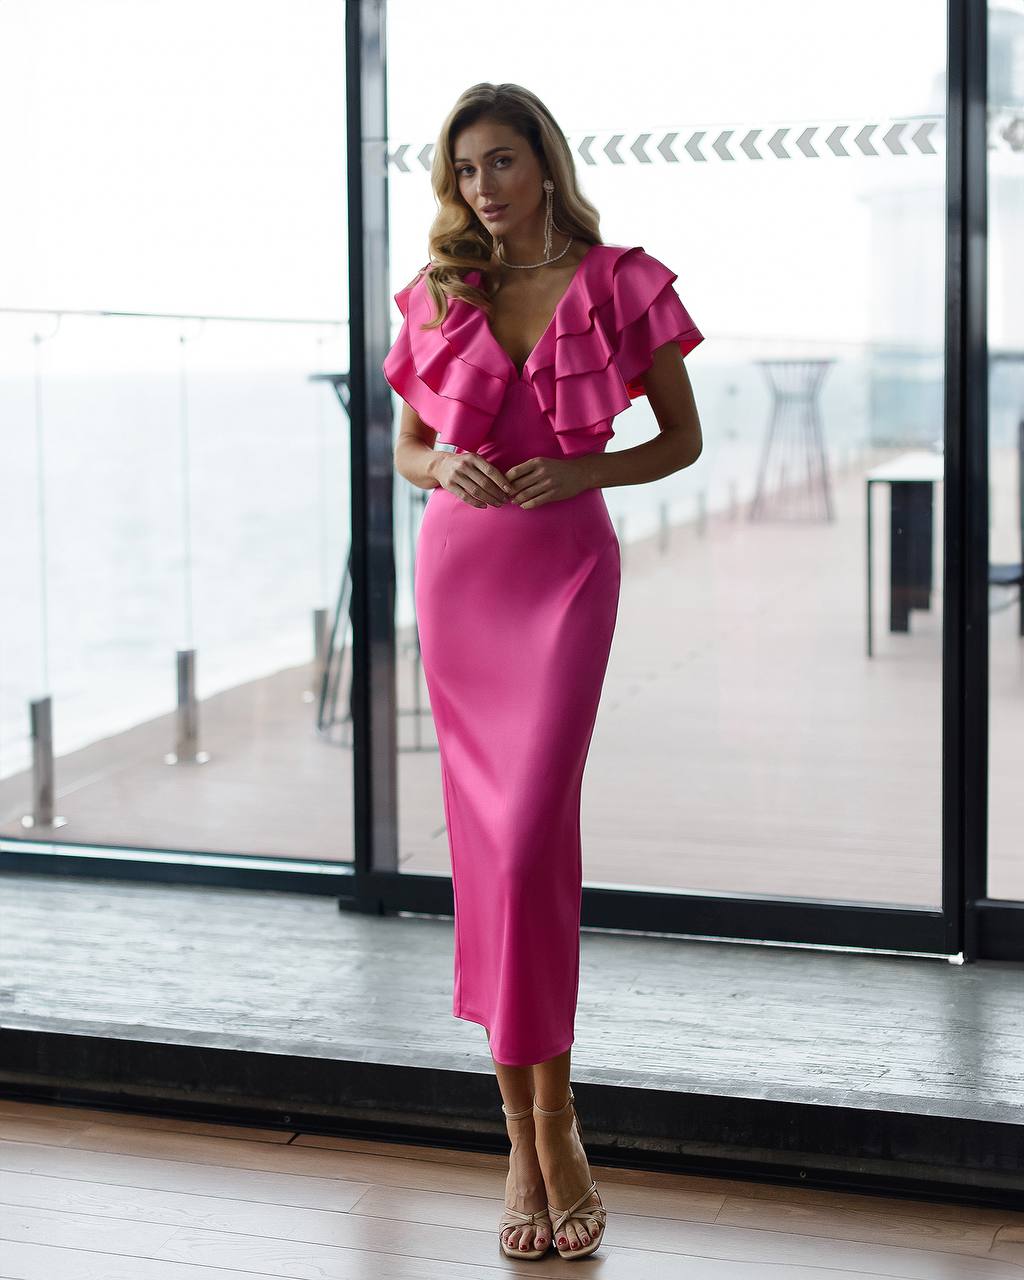 a woman standing in front of a window wearing a pink dress